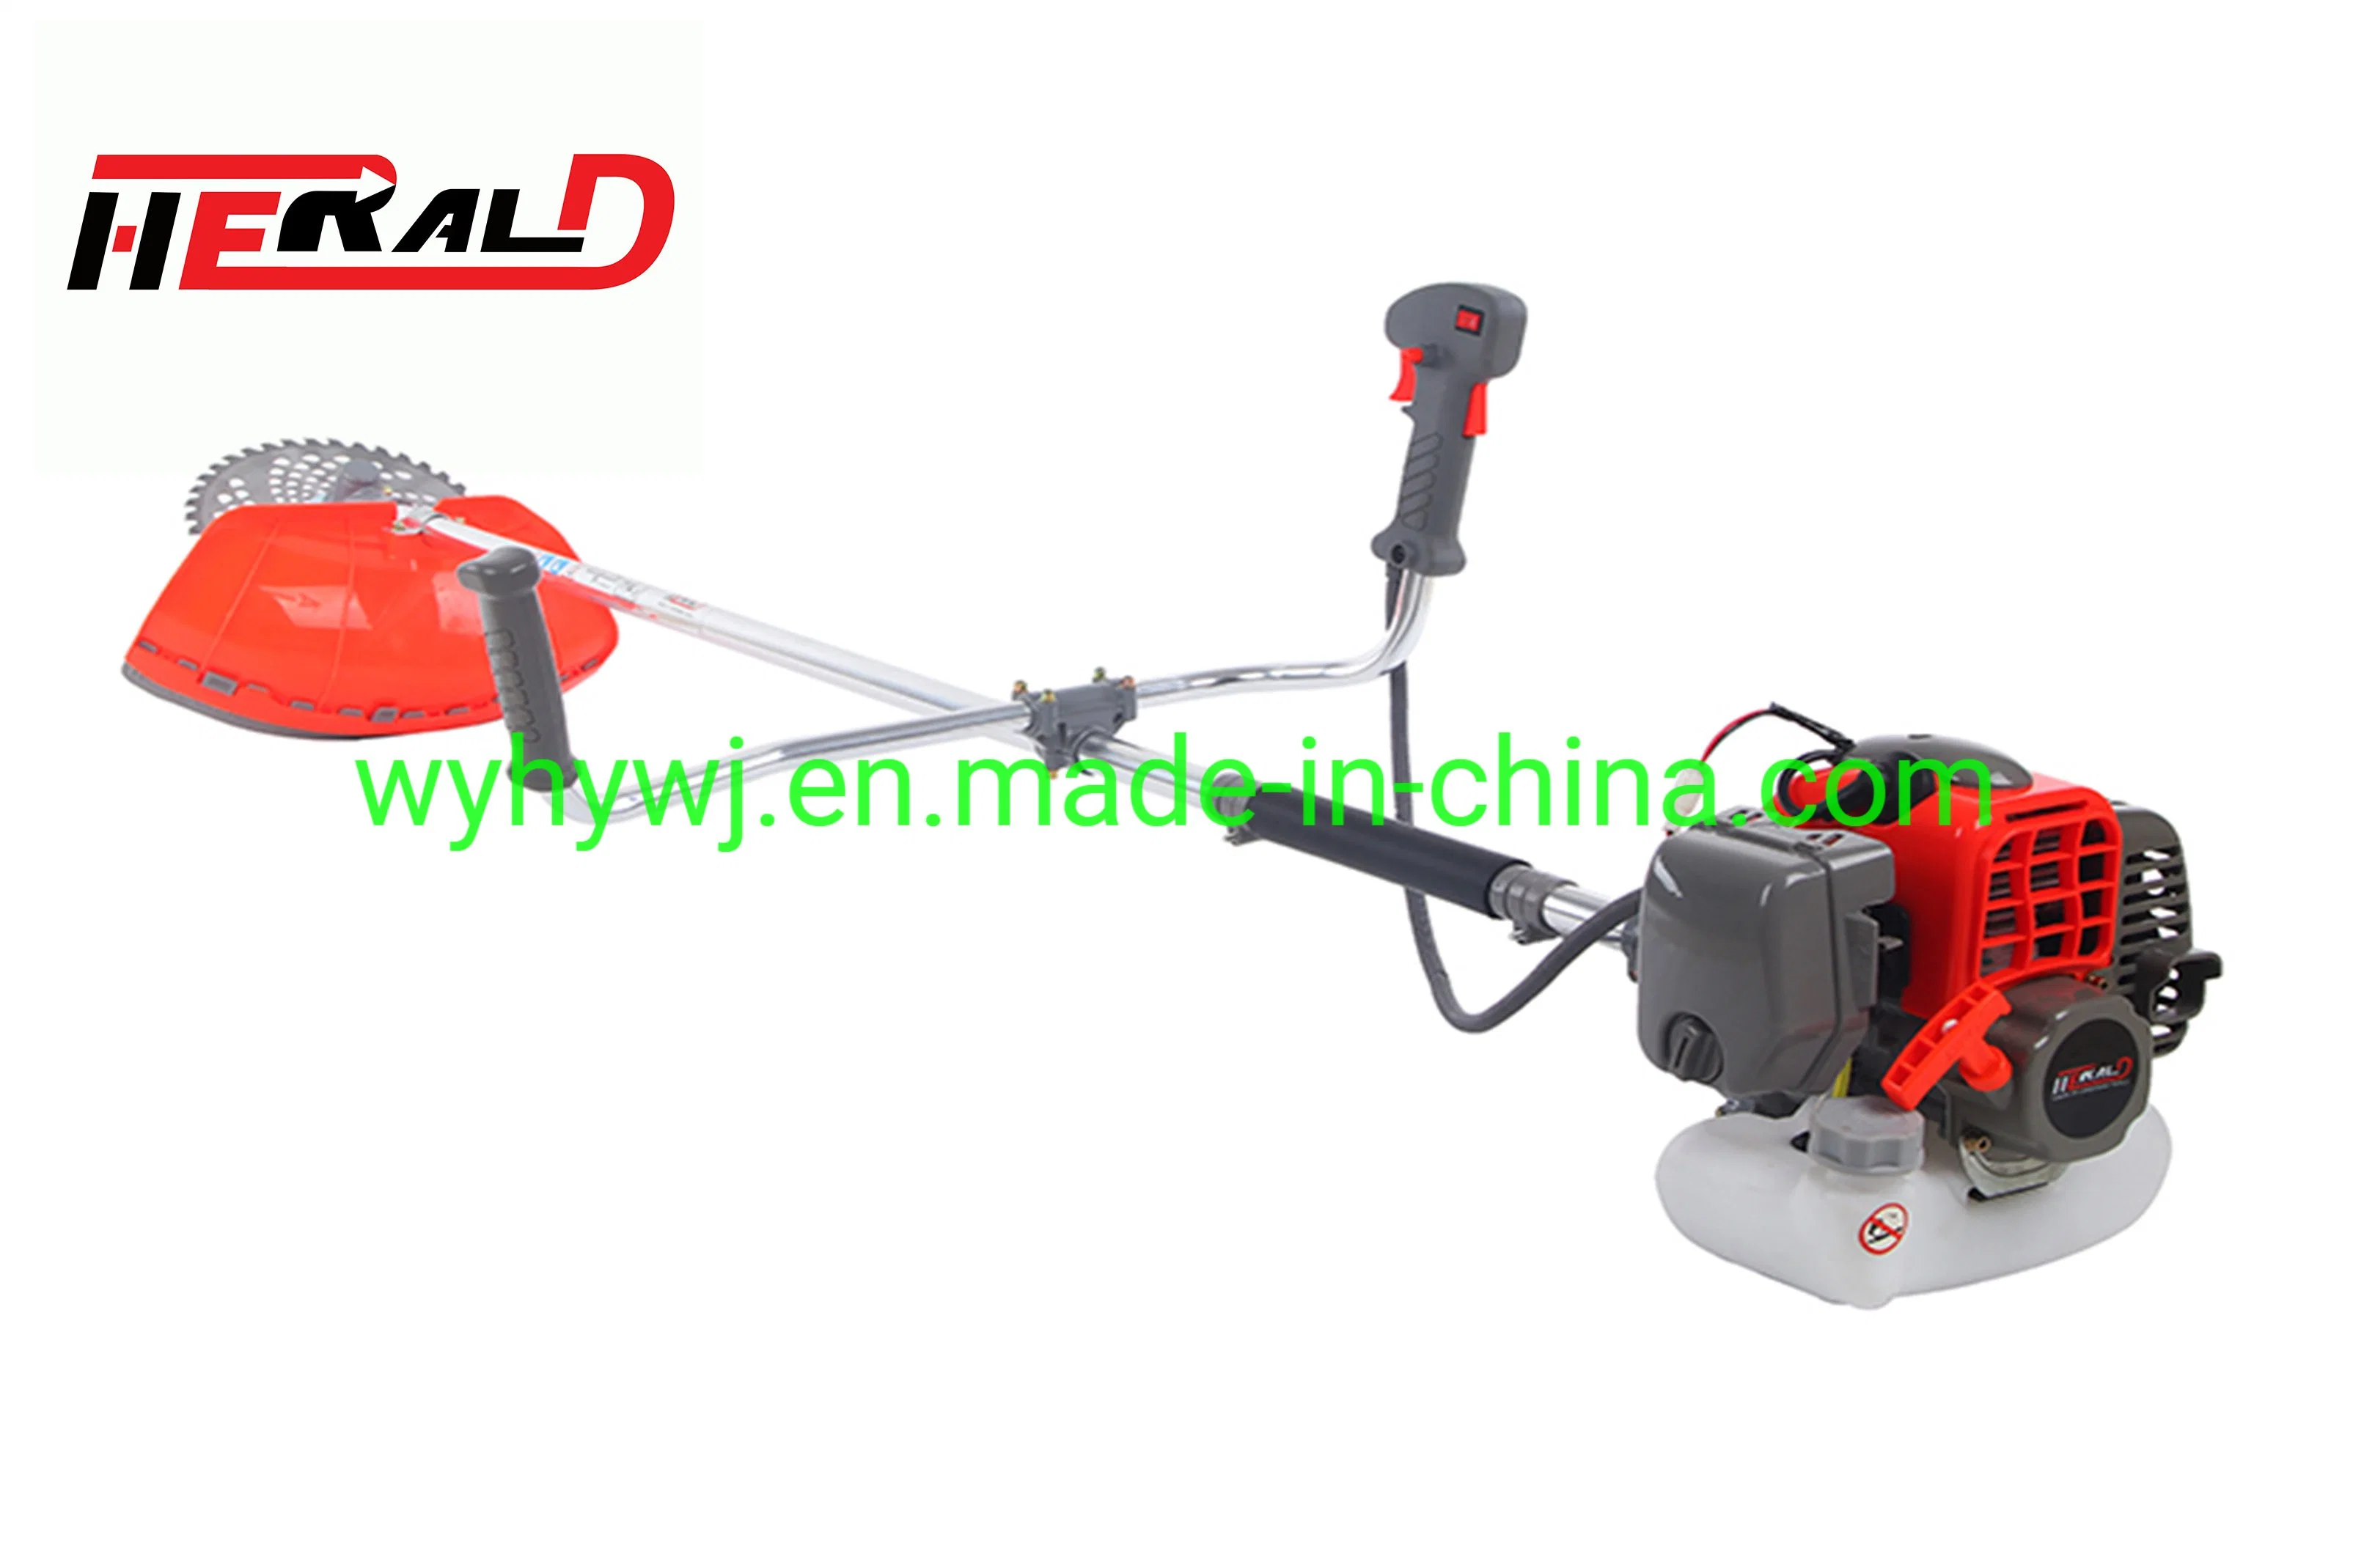 Professional 2 Stroke Good Quality 43cc/52cc Gasoline Brush Cutter Hy-415CT Cut The Grass Easily Garden Tool